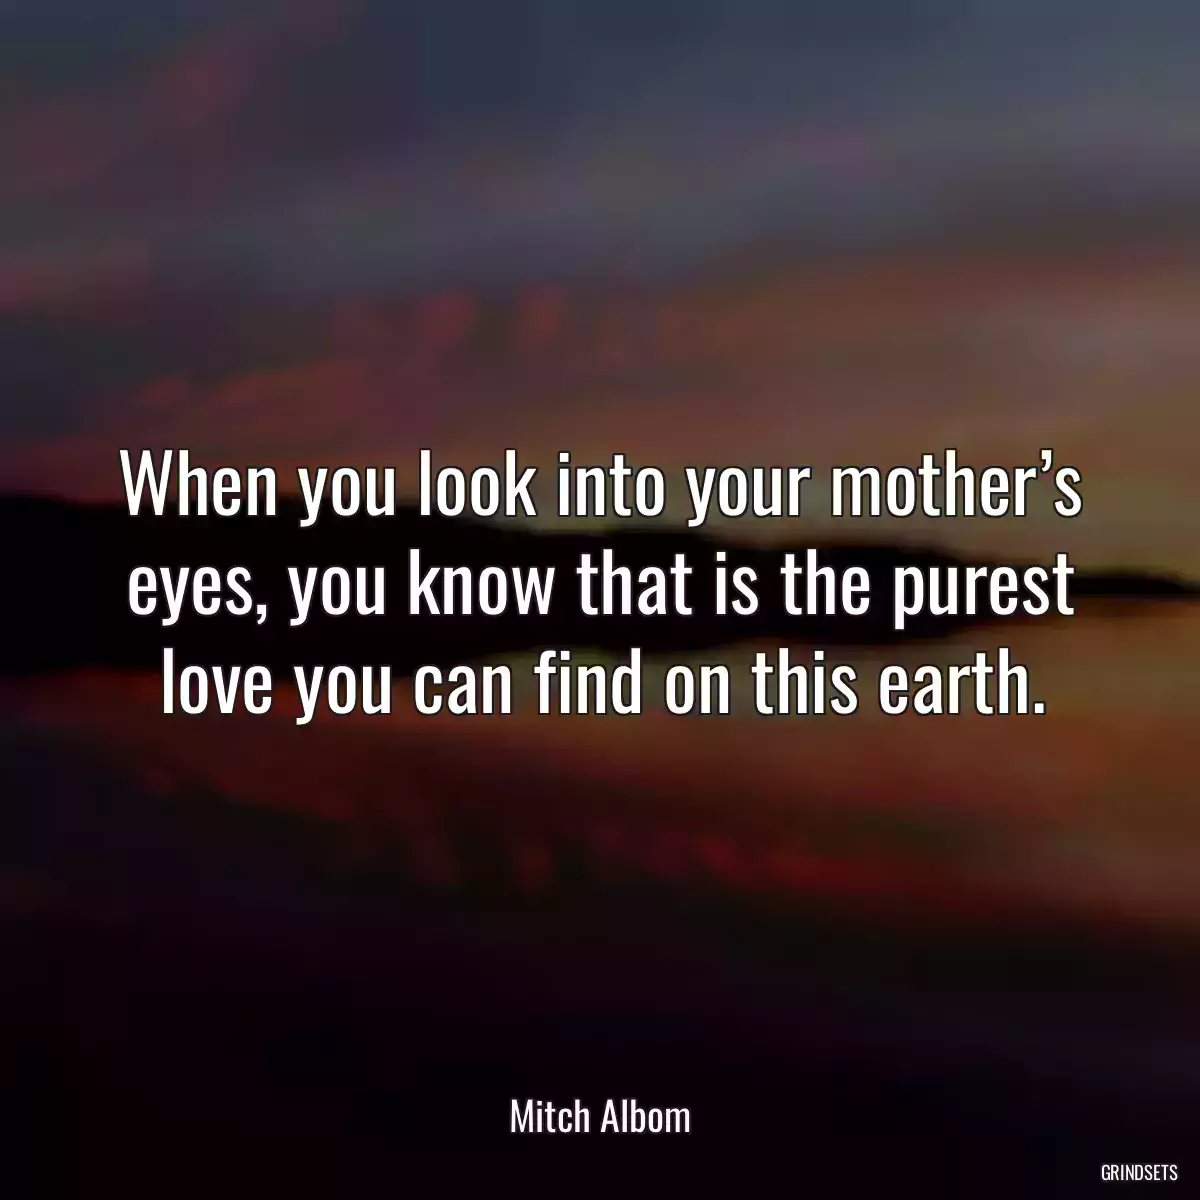 When you look into your mother’s eyes, you know that is the purest love you can find on this earth.